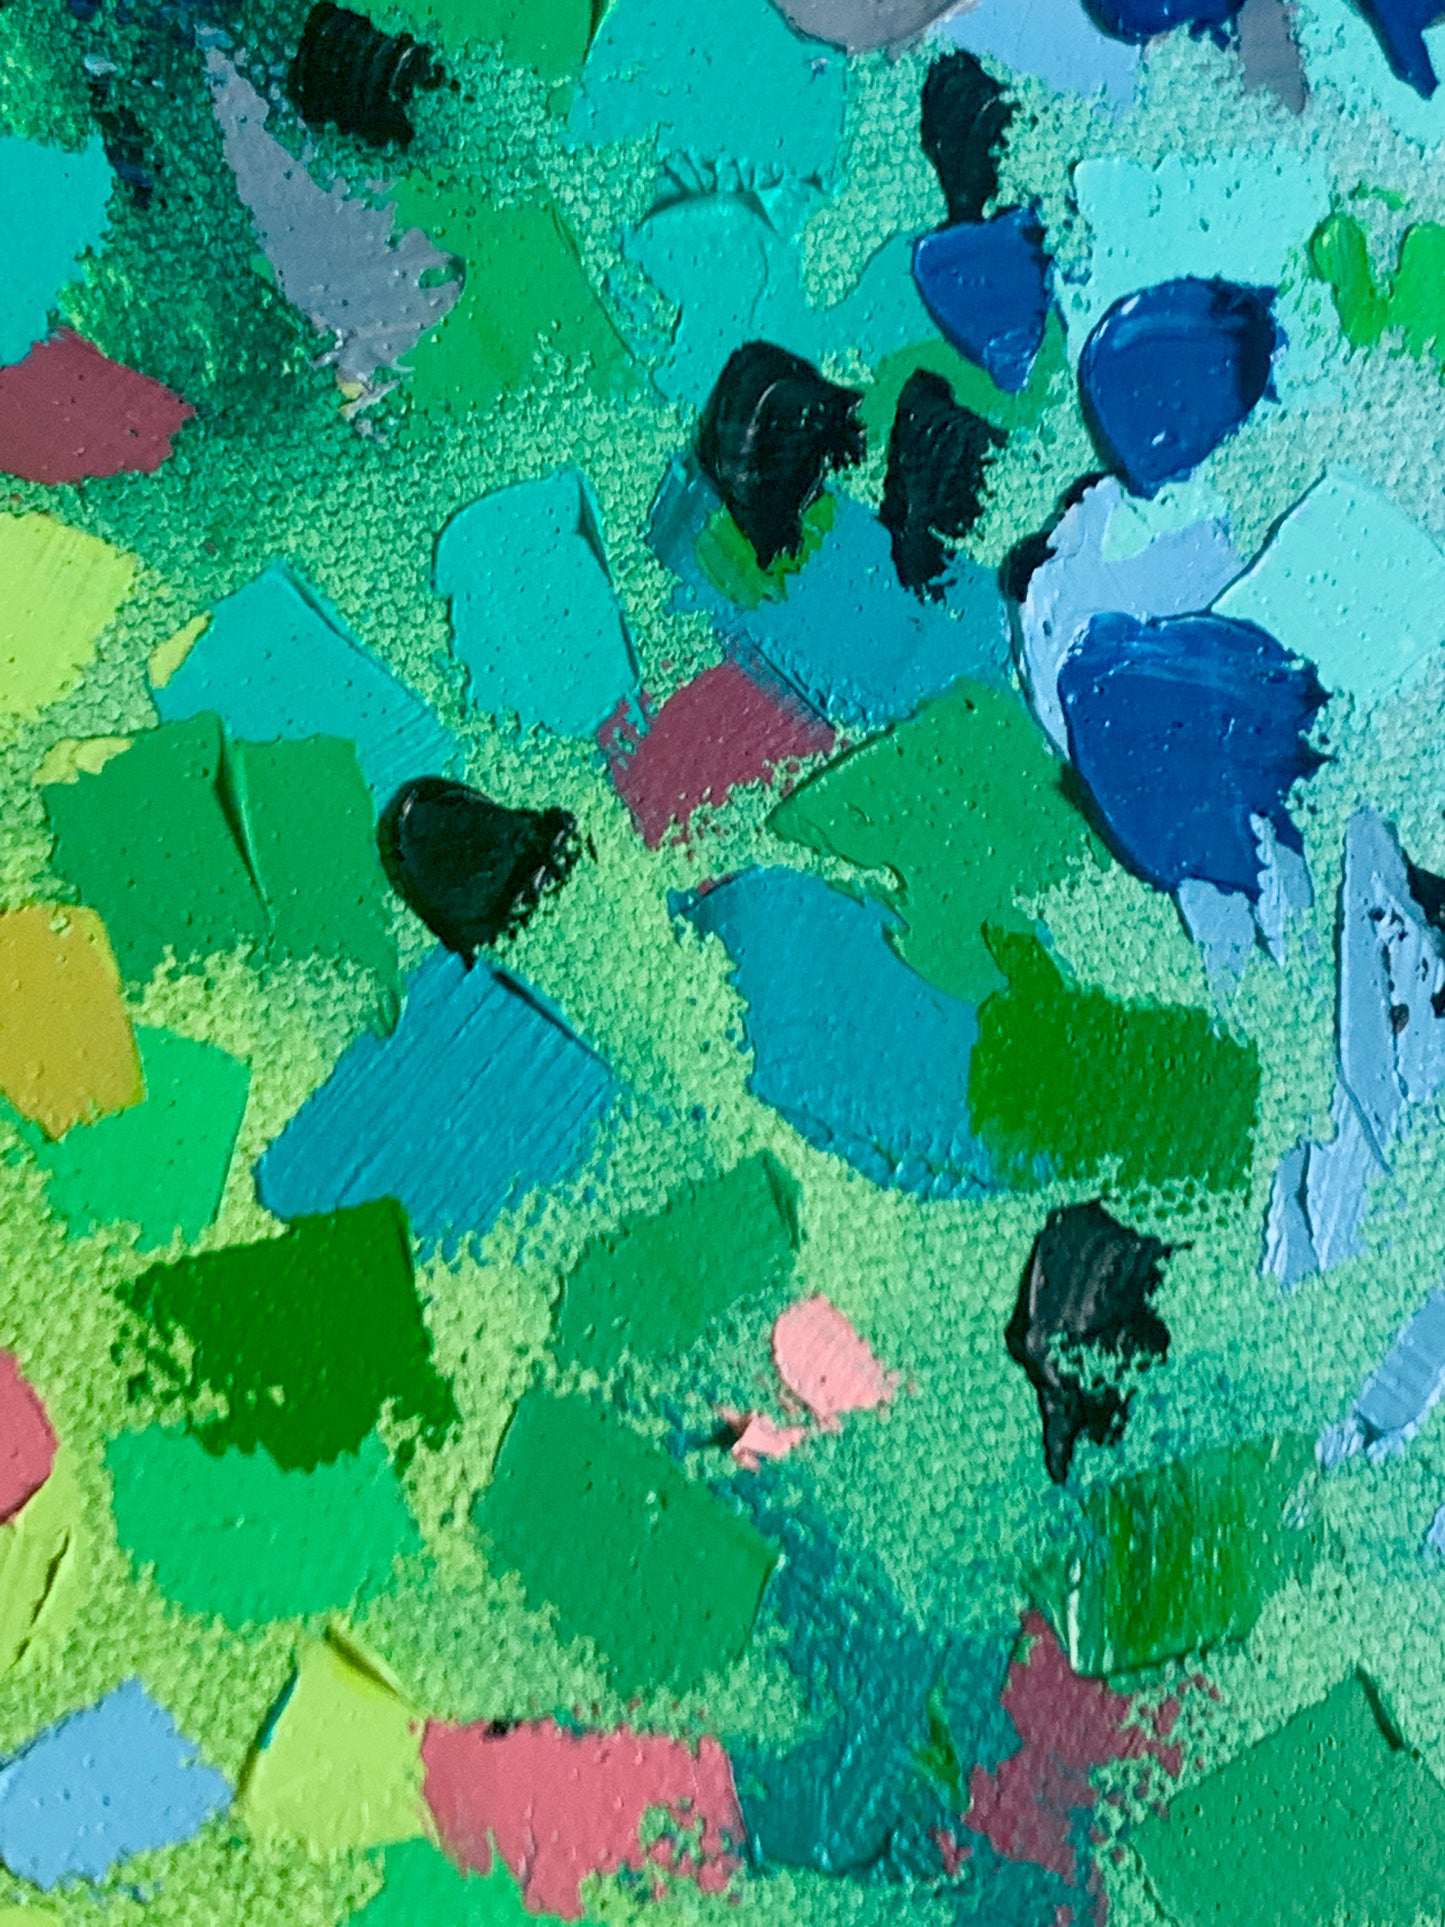 Texture of the green area of the painting